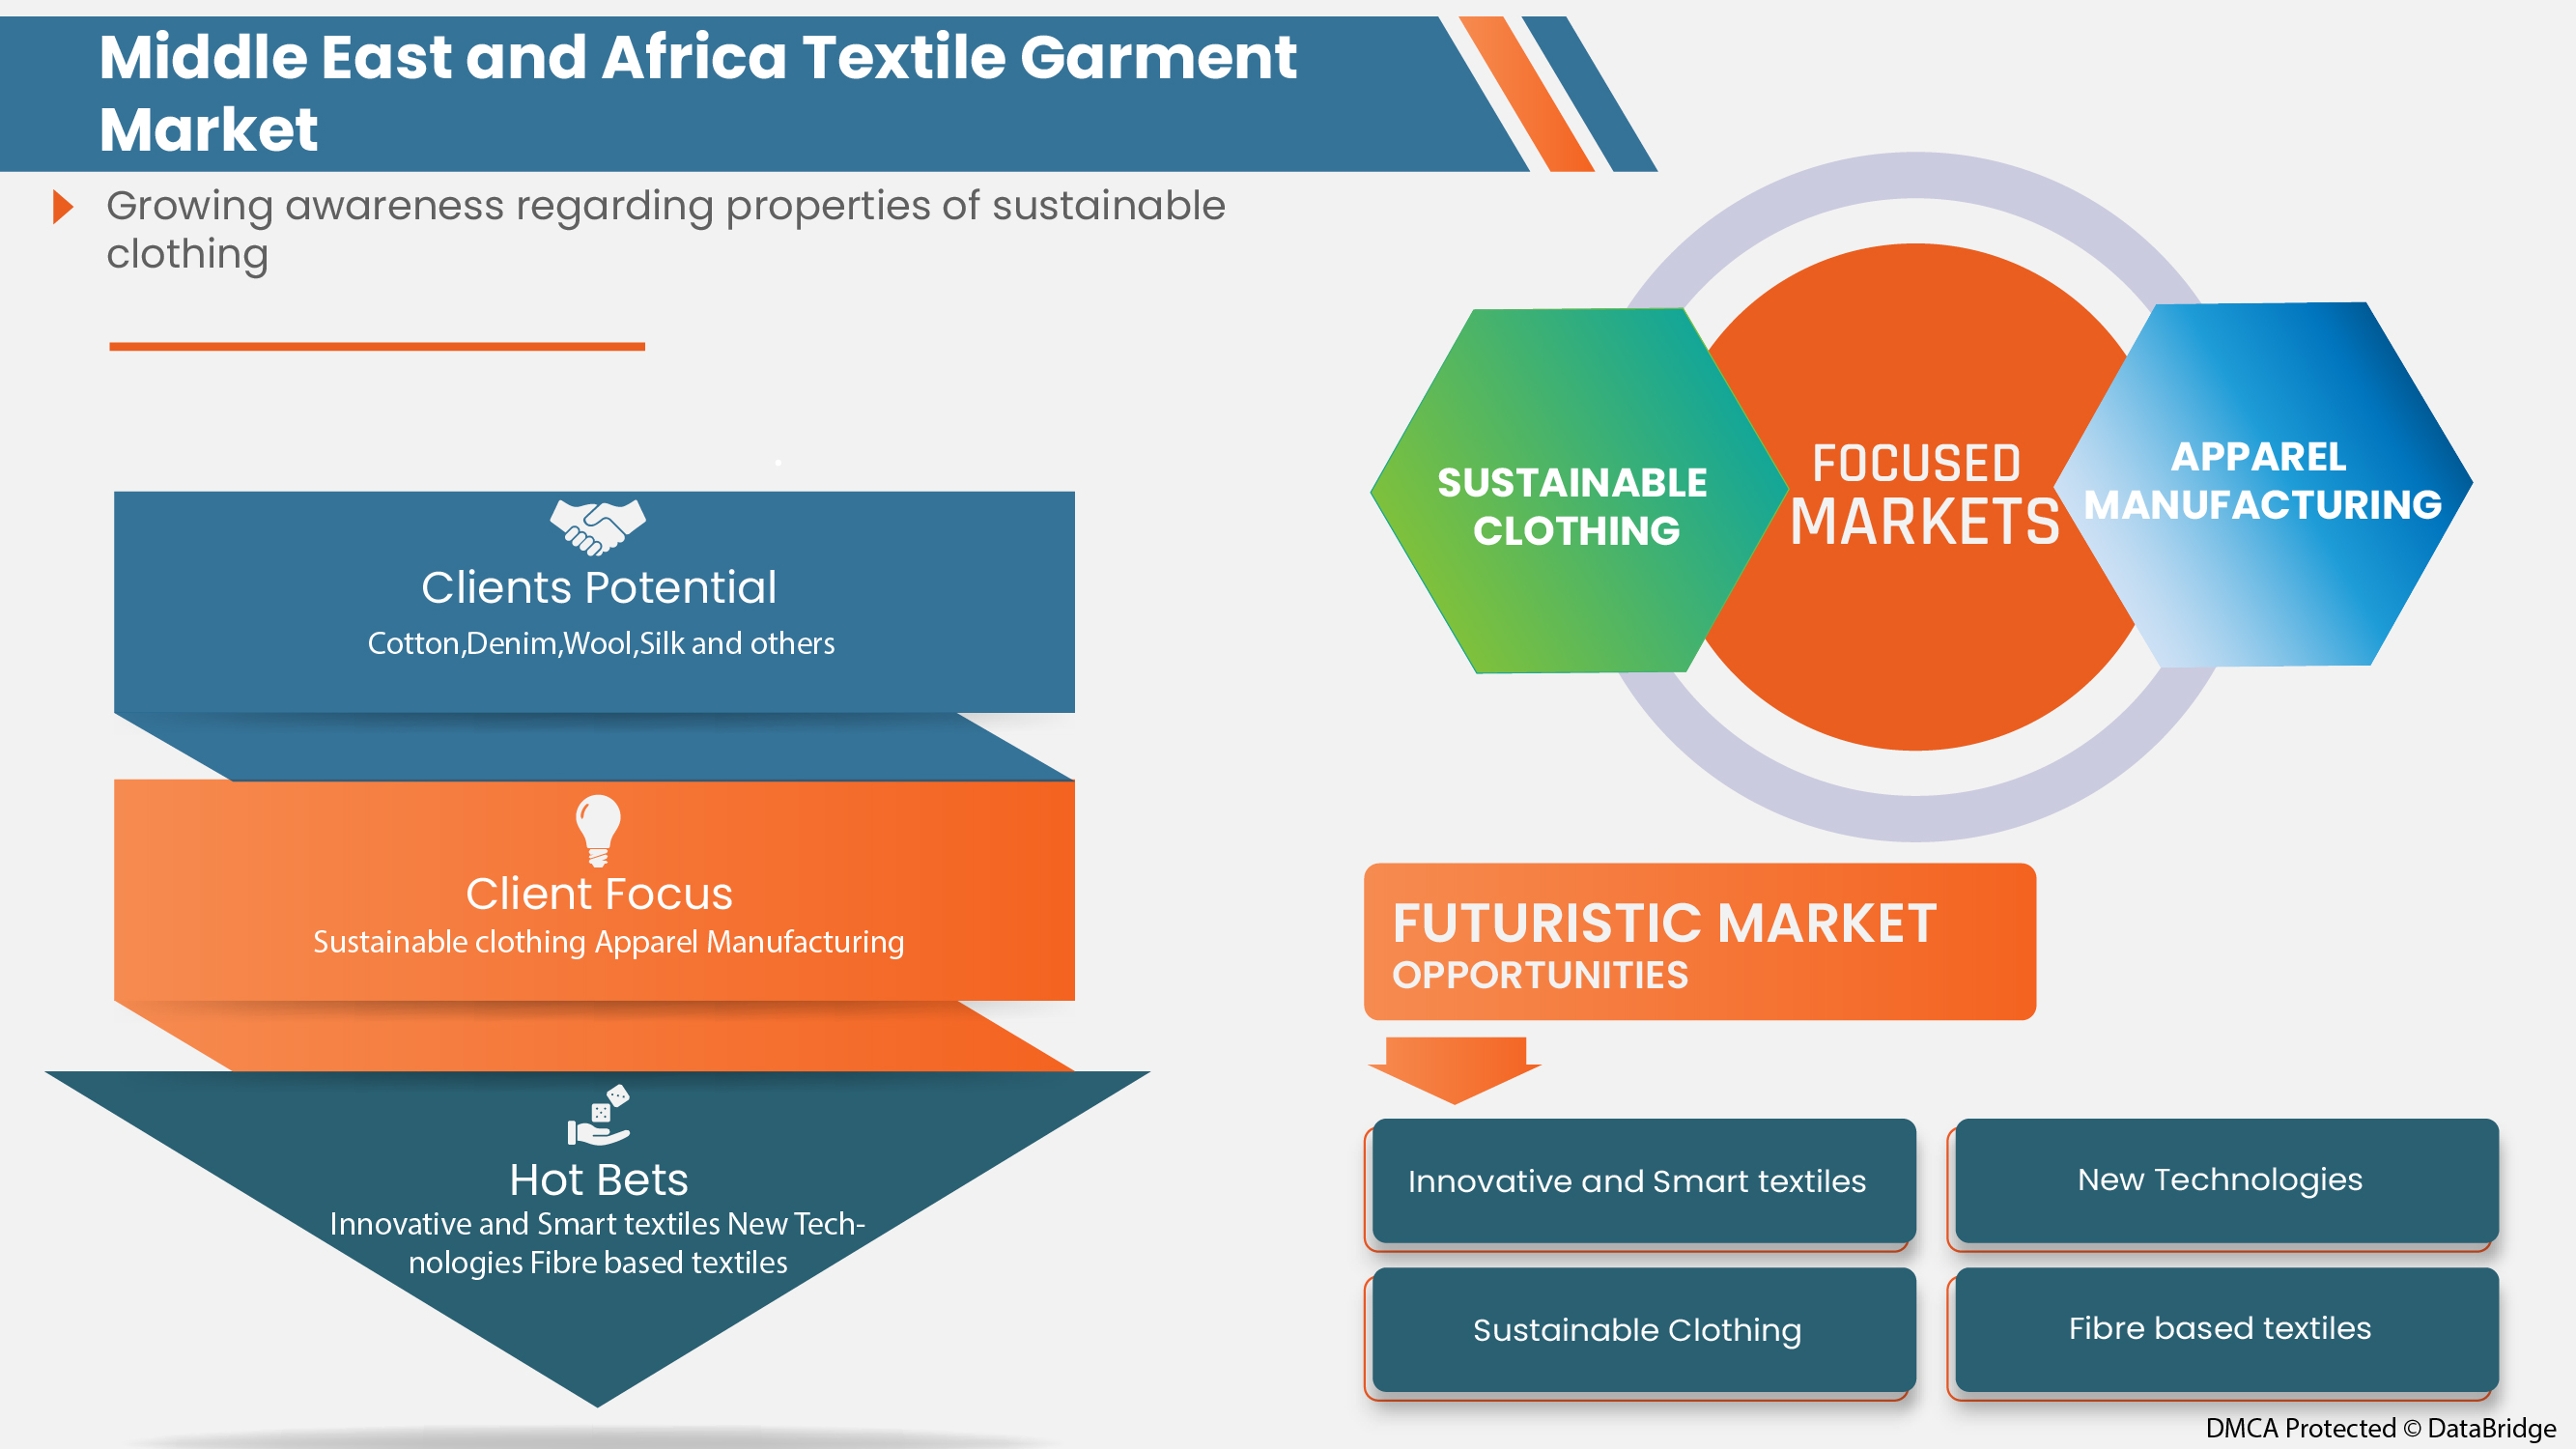 Middle East and Africa Textile Garment Market